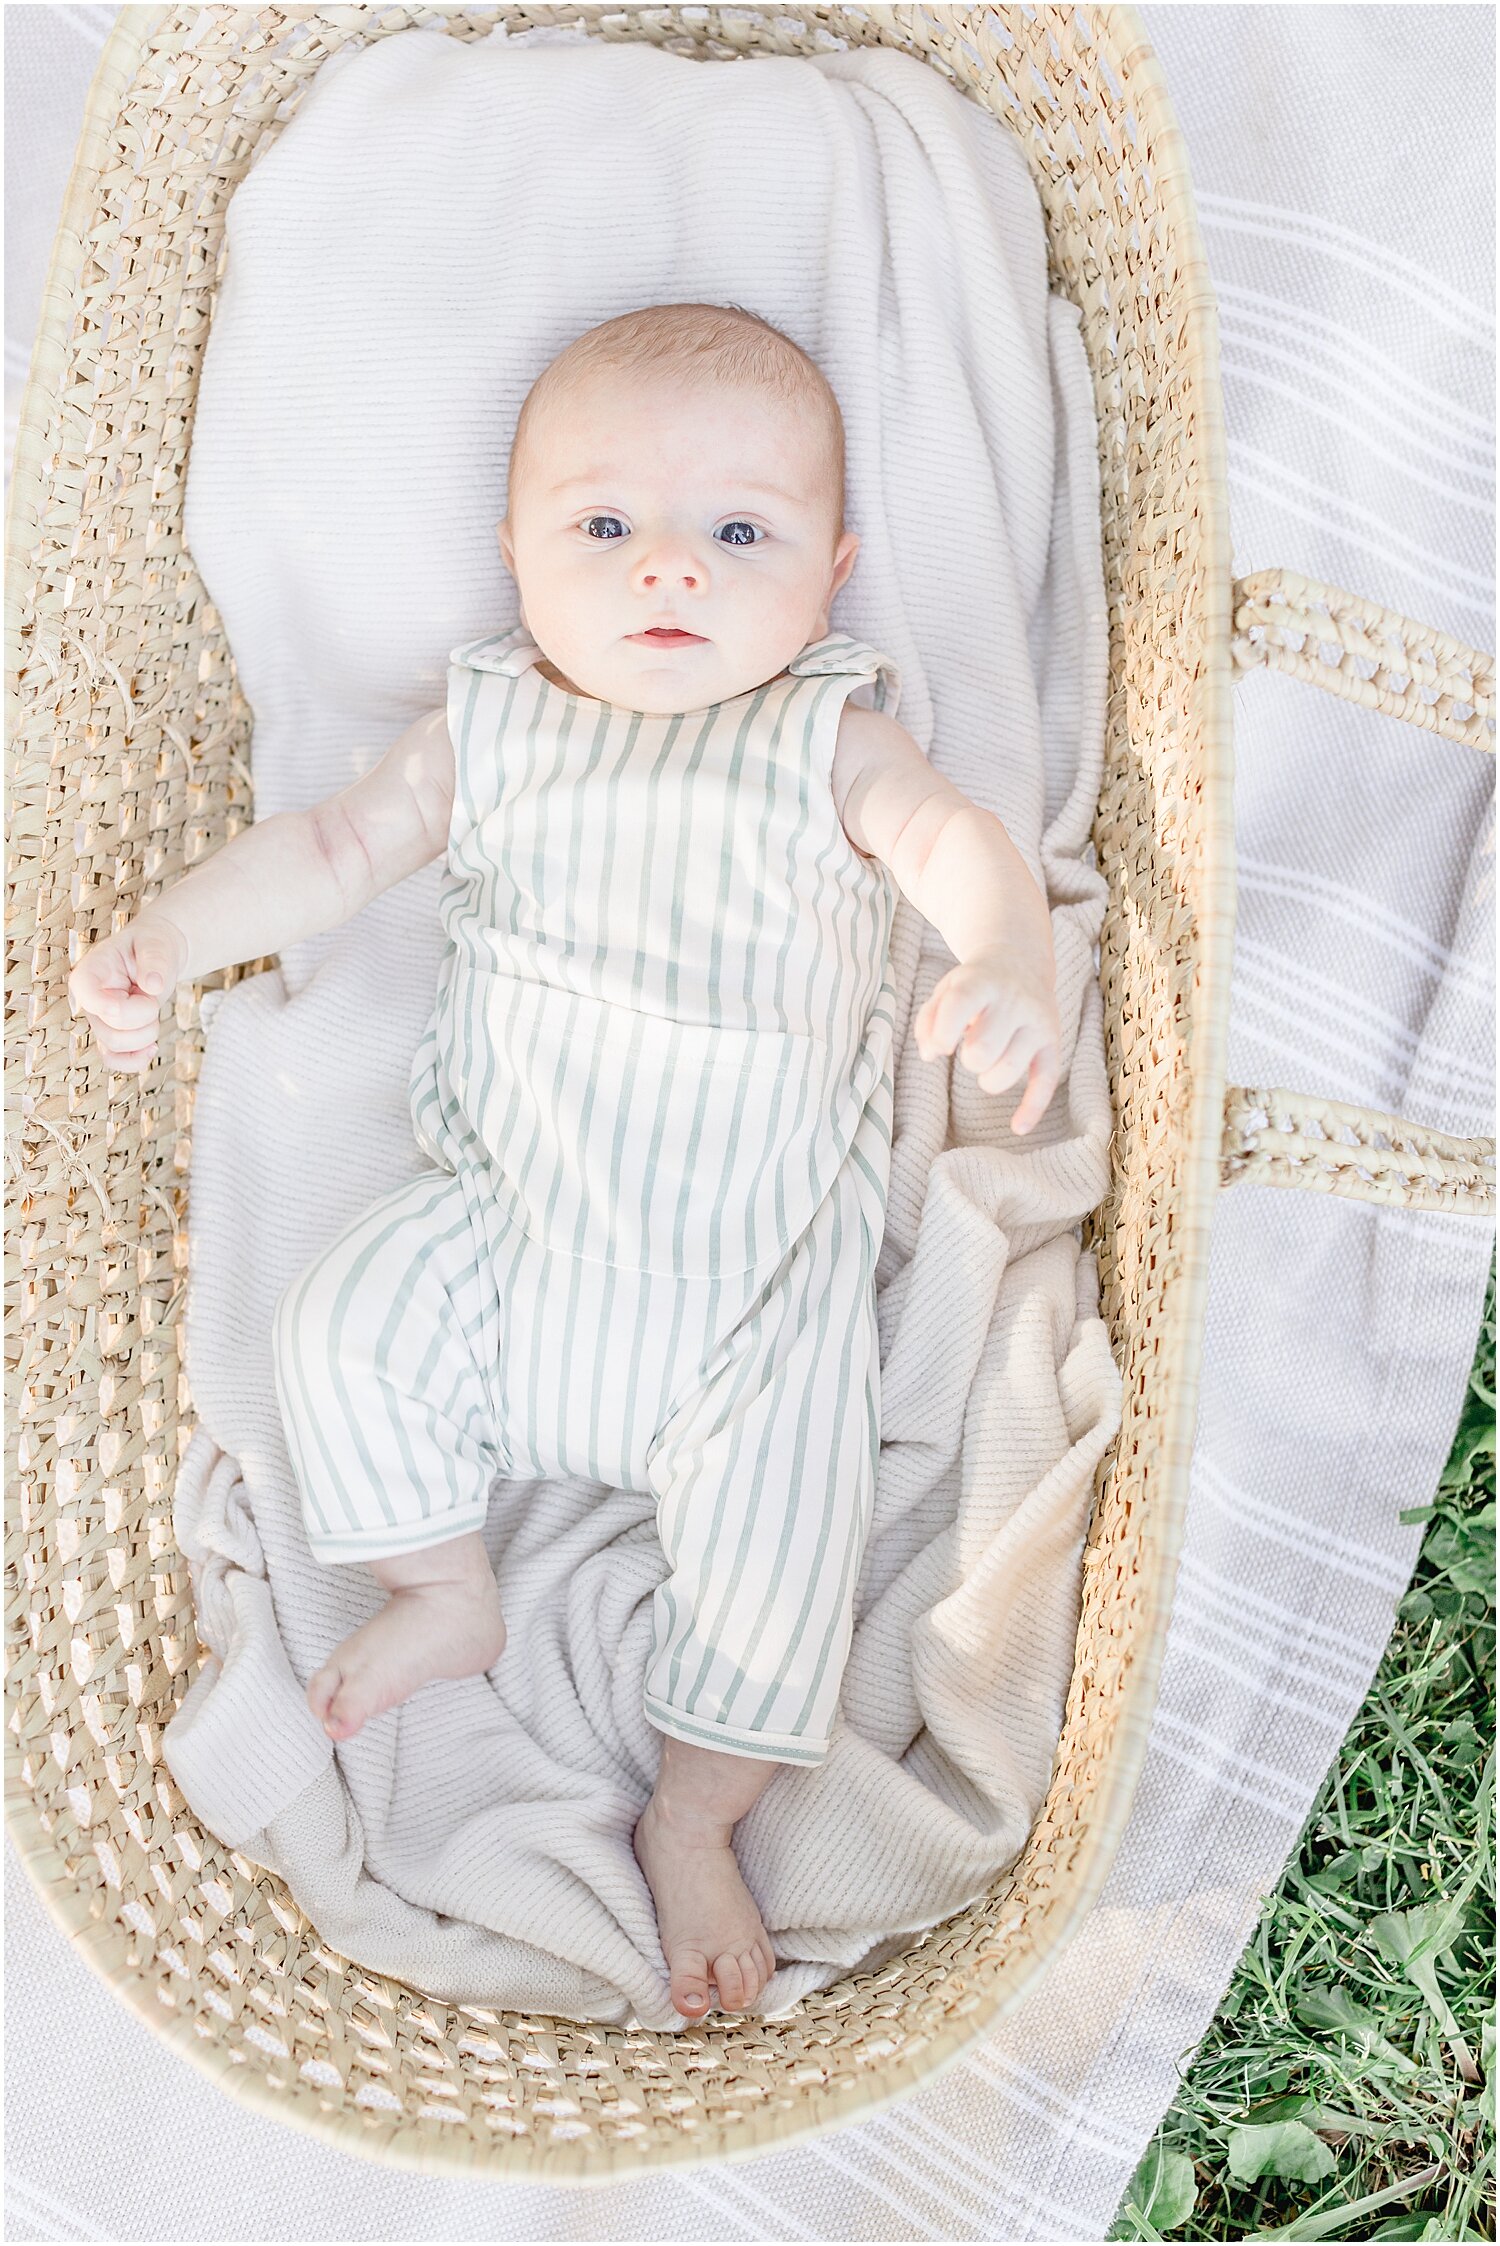 Outdoor newborn photoshoot using Moses basket. Photos by Connecticut Baby Photographer, Kristin Wood Photography.